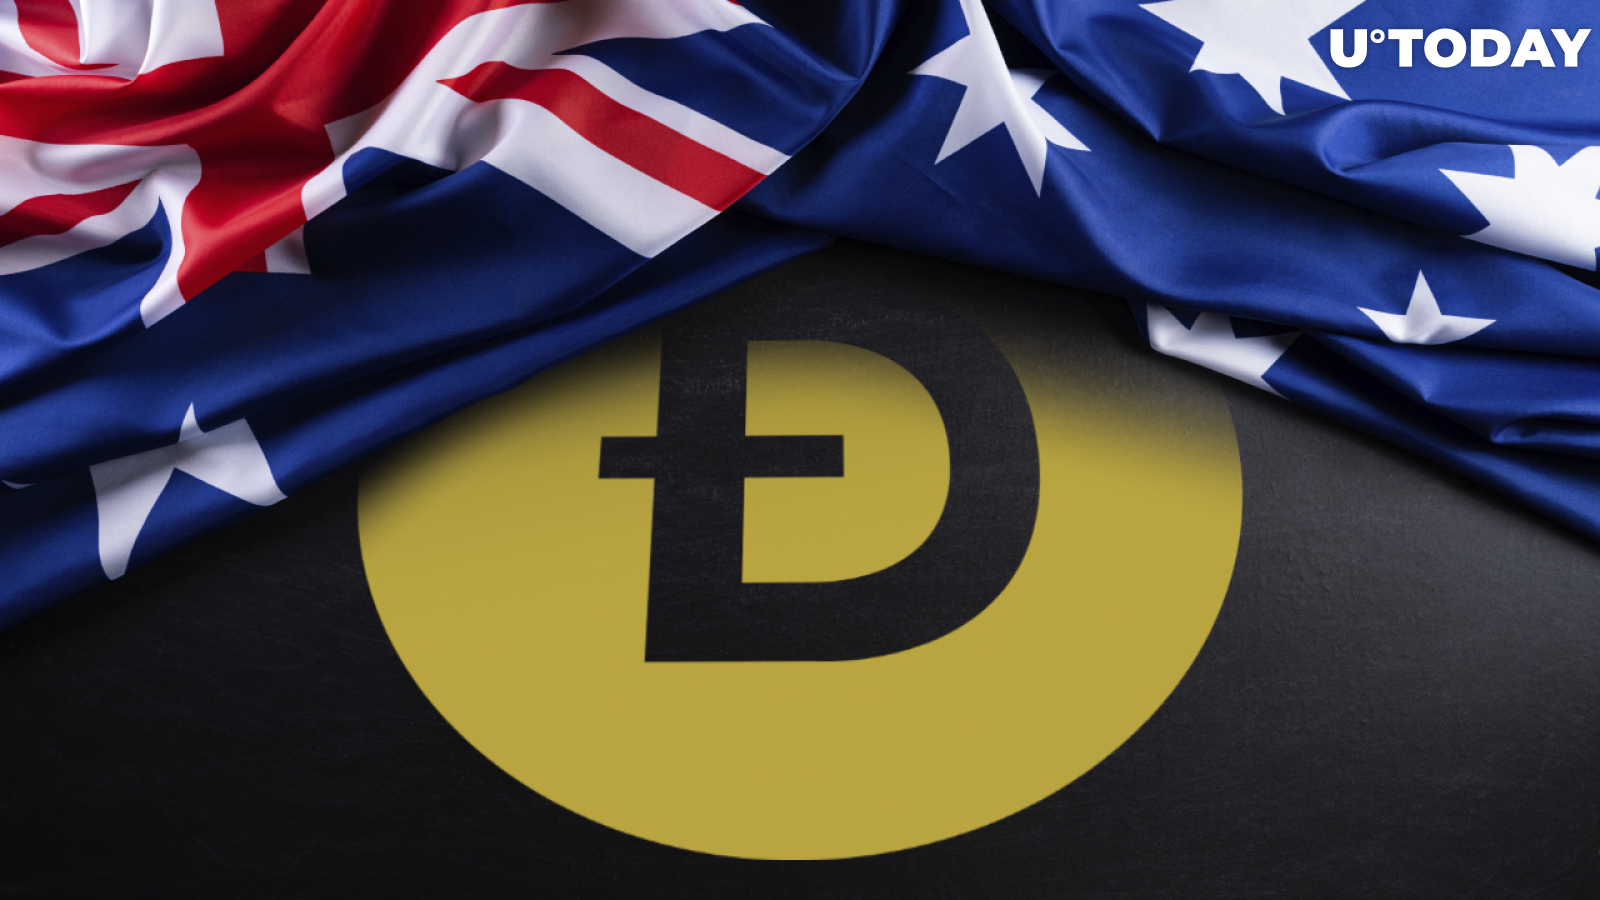 Dogecoin Adoption Is Likely Exaggerated, Says Australian Central Bank